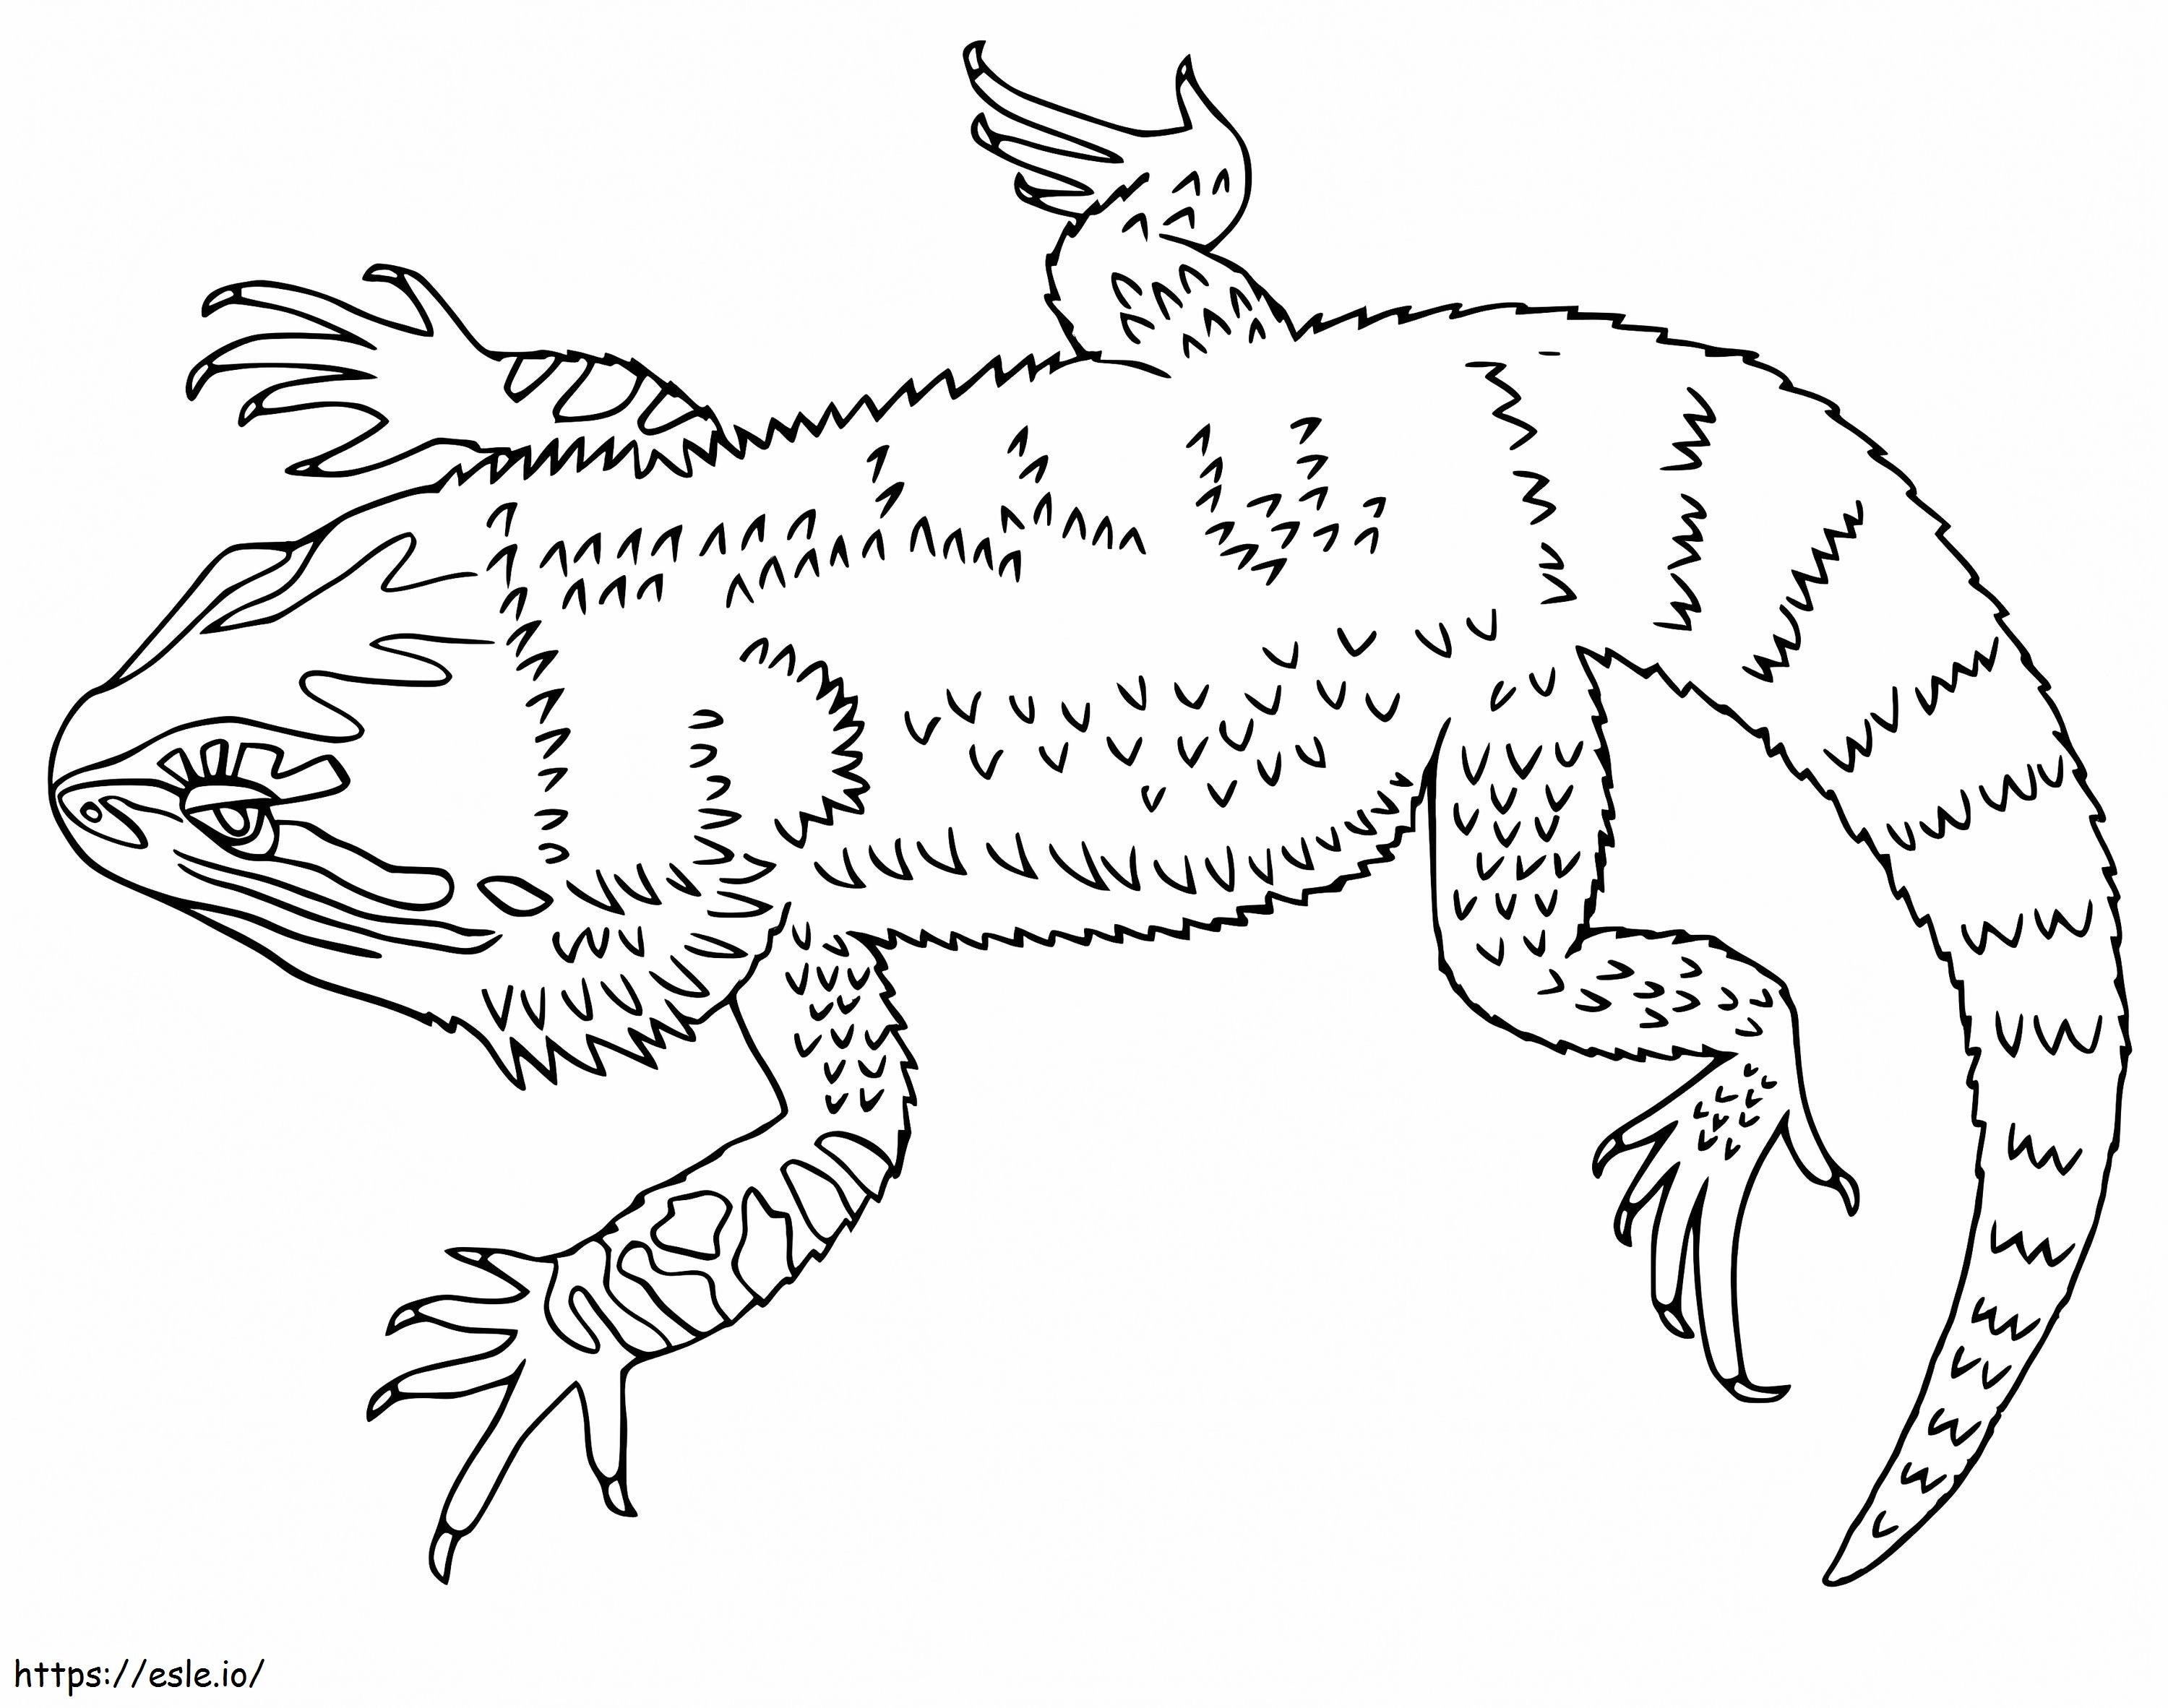 Bearded Dragon 2 coloring page